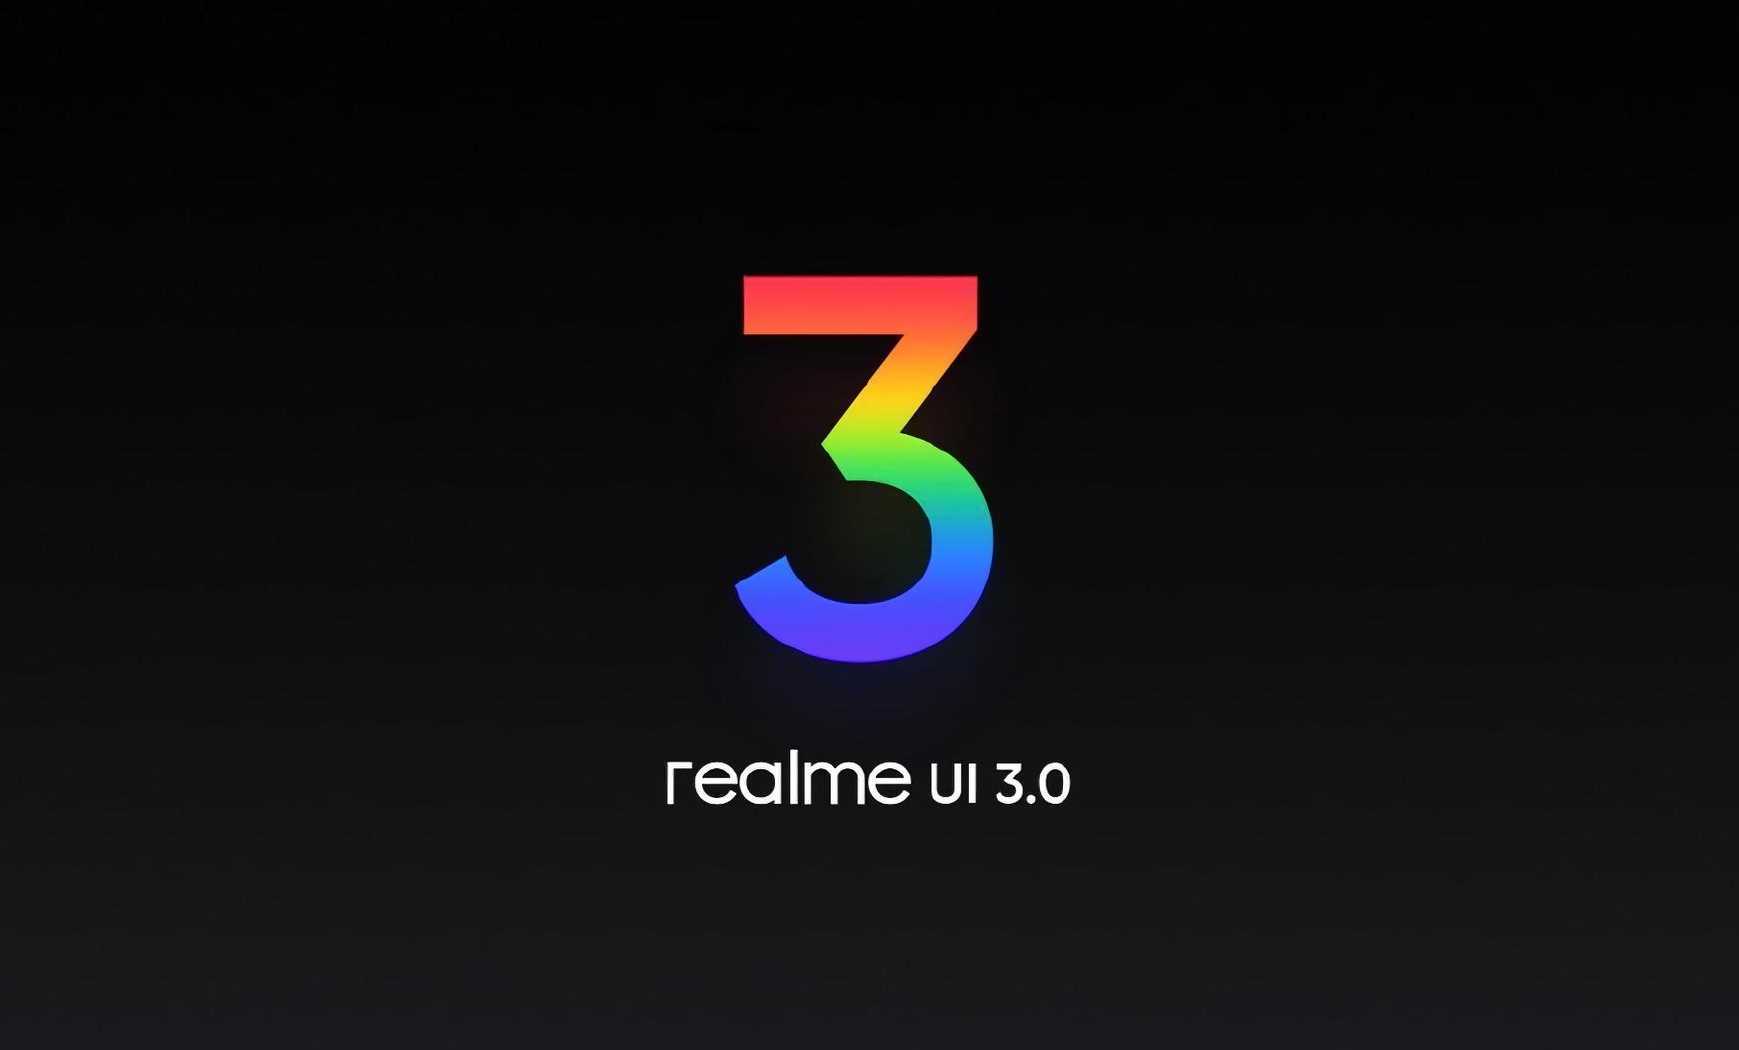 22 Realme smartphones will receive Realme UI 3.0 firmware - official list published